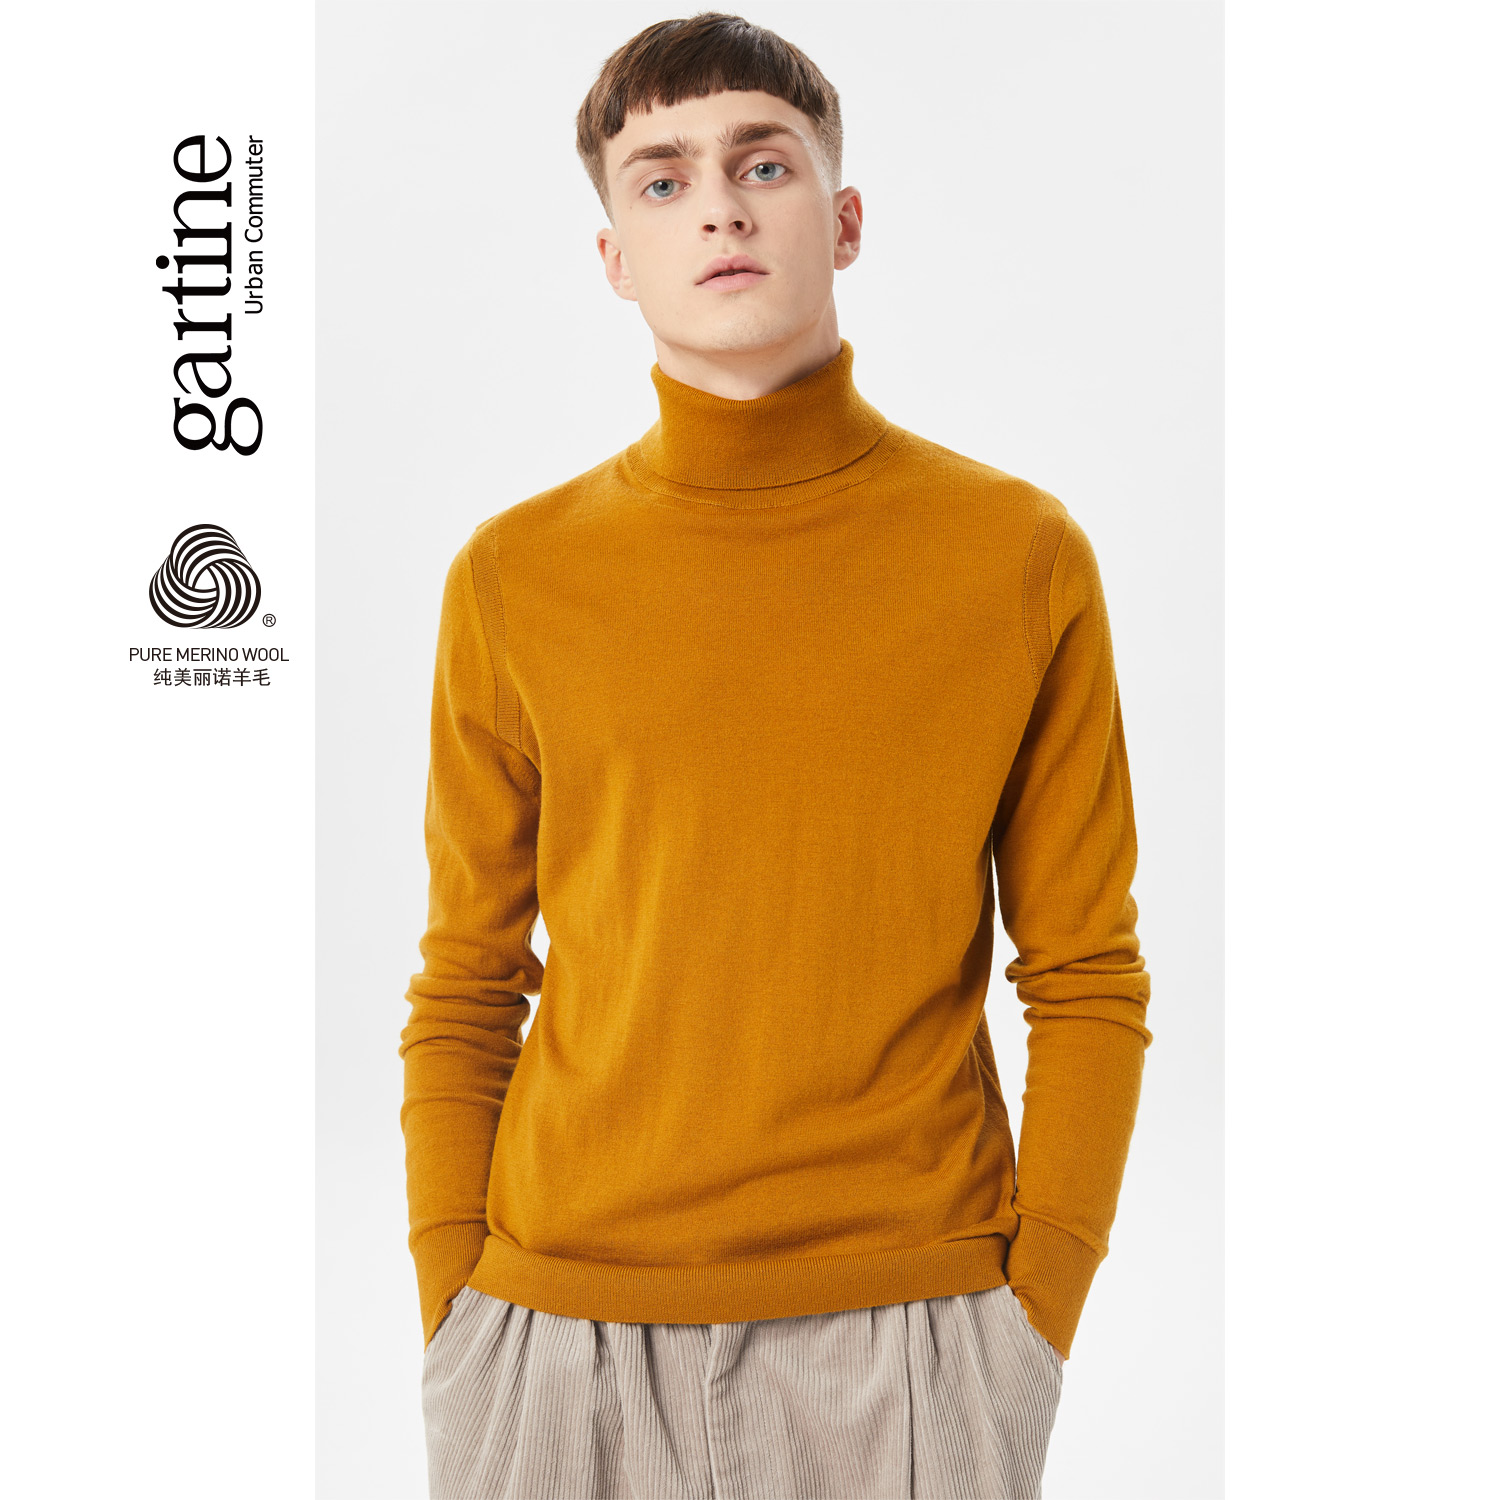 Saunitani men's basic section Turned Over Knitwear 2019 Pure Merino Wool Multicolored Casual Warm Sweater